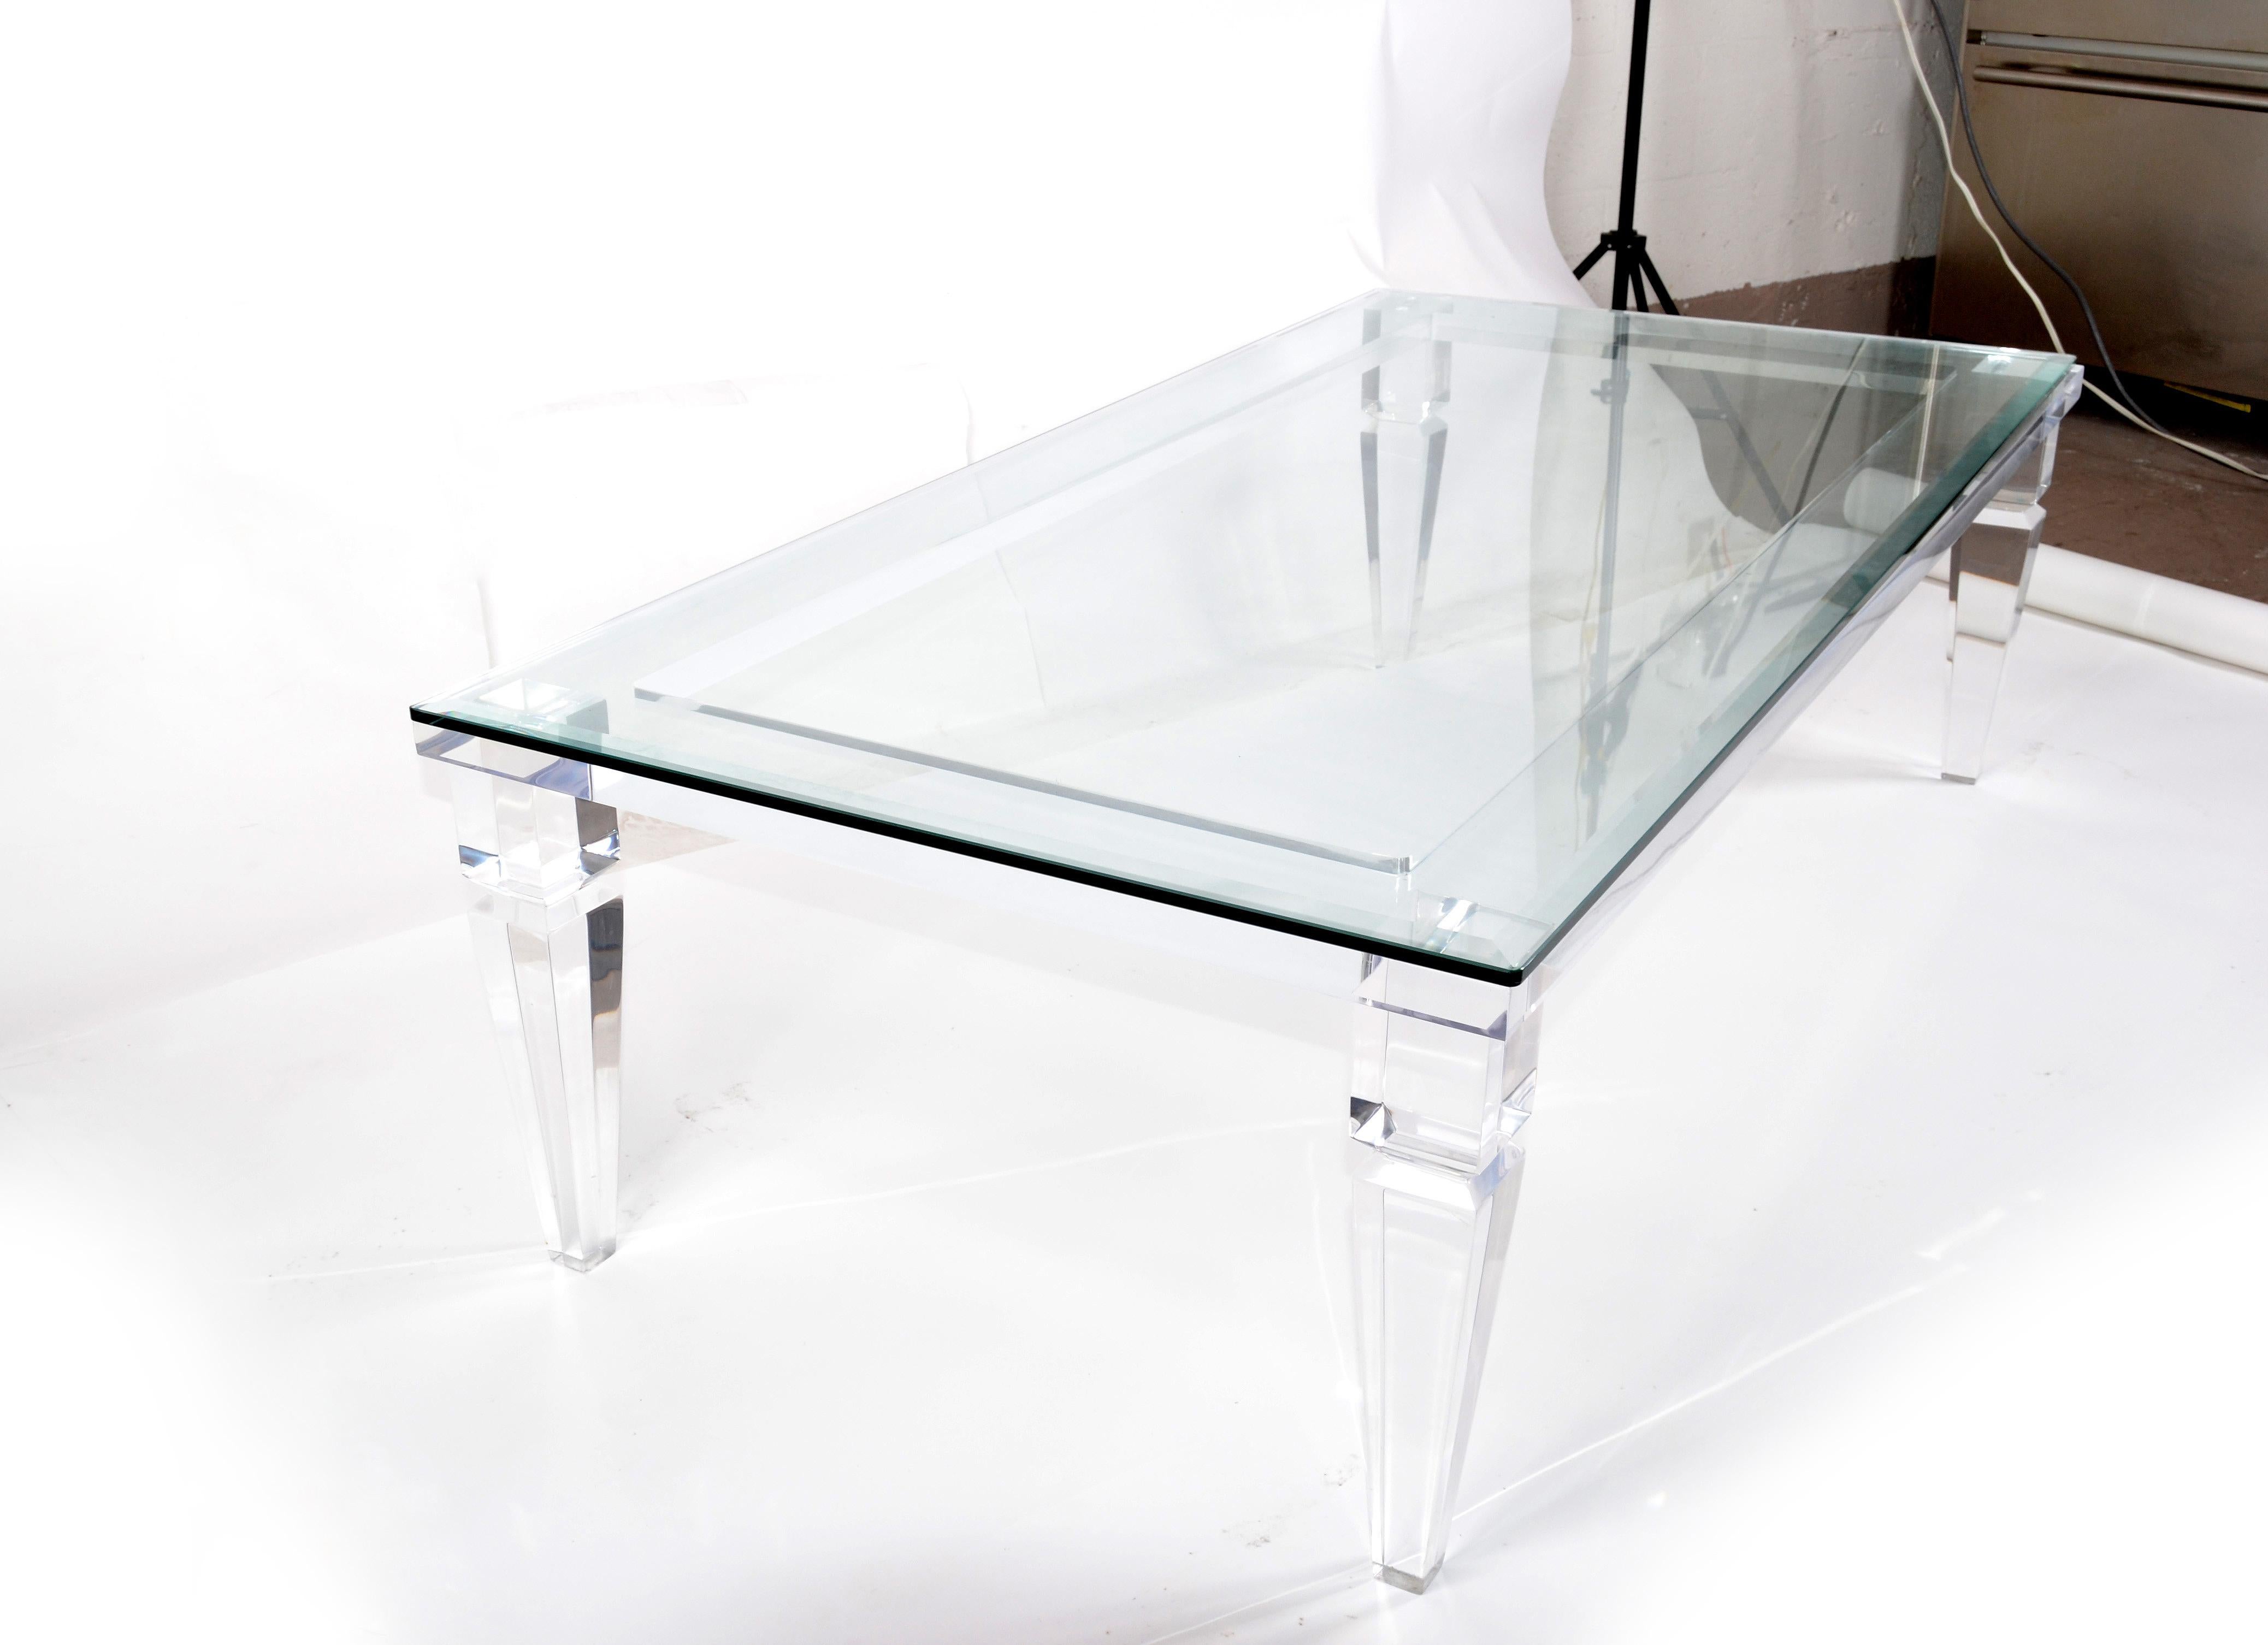 Late 20th Century Charles Hollis Jones Mid-Century Modern Lucite & Beveled Glass Coffee Table 1970 For Sale